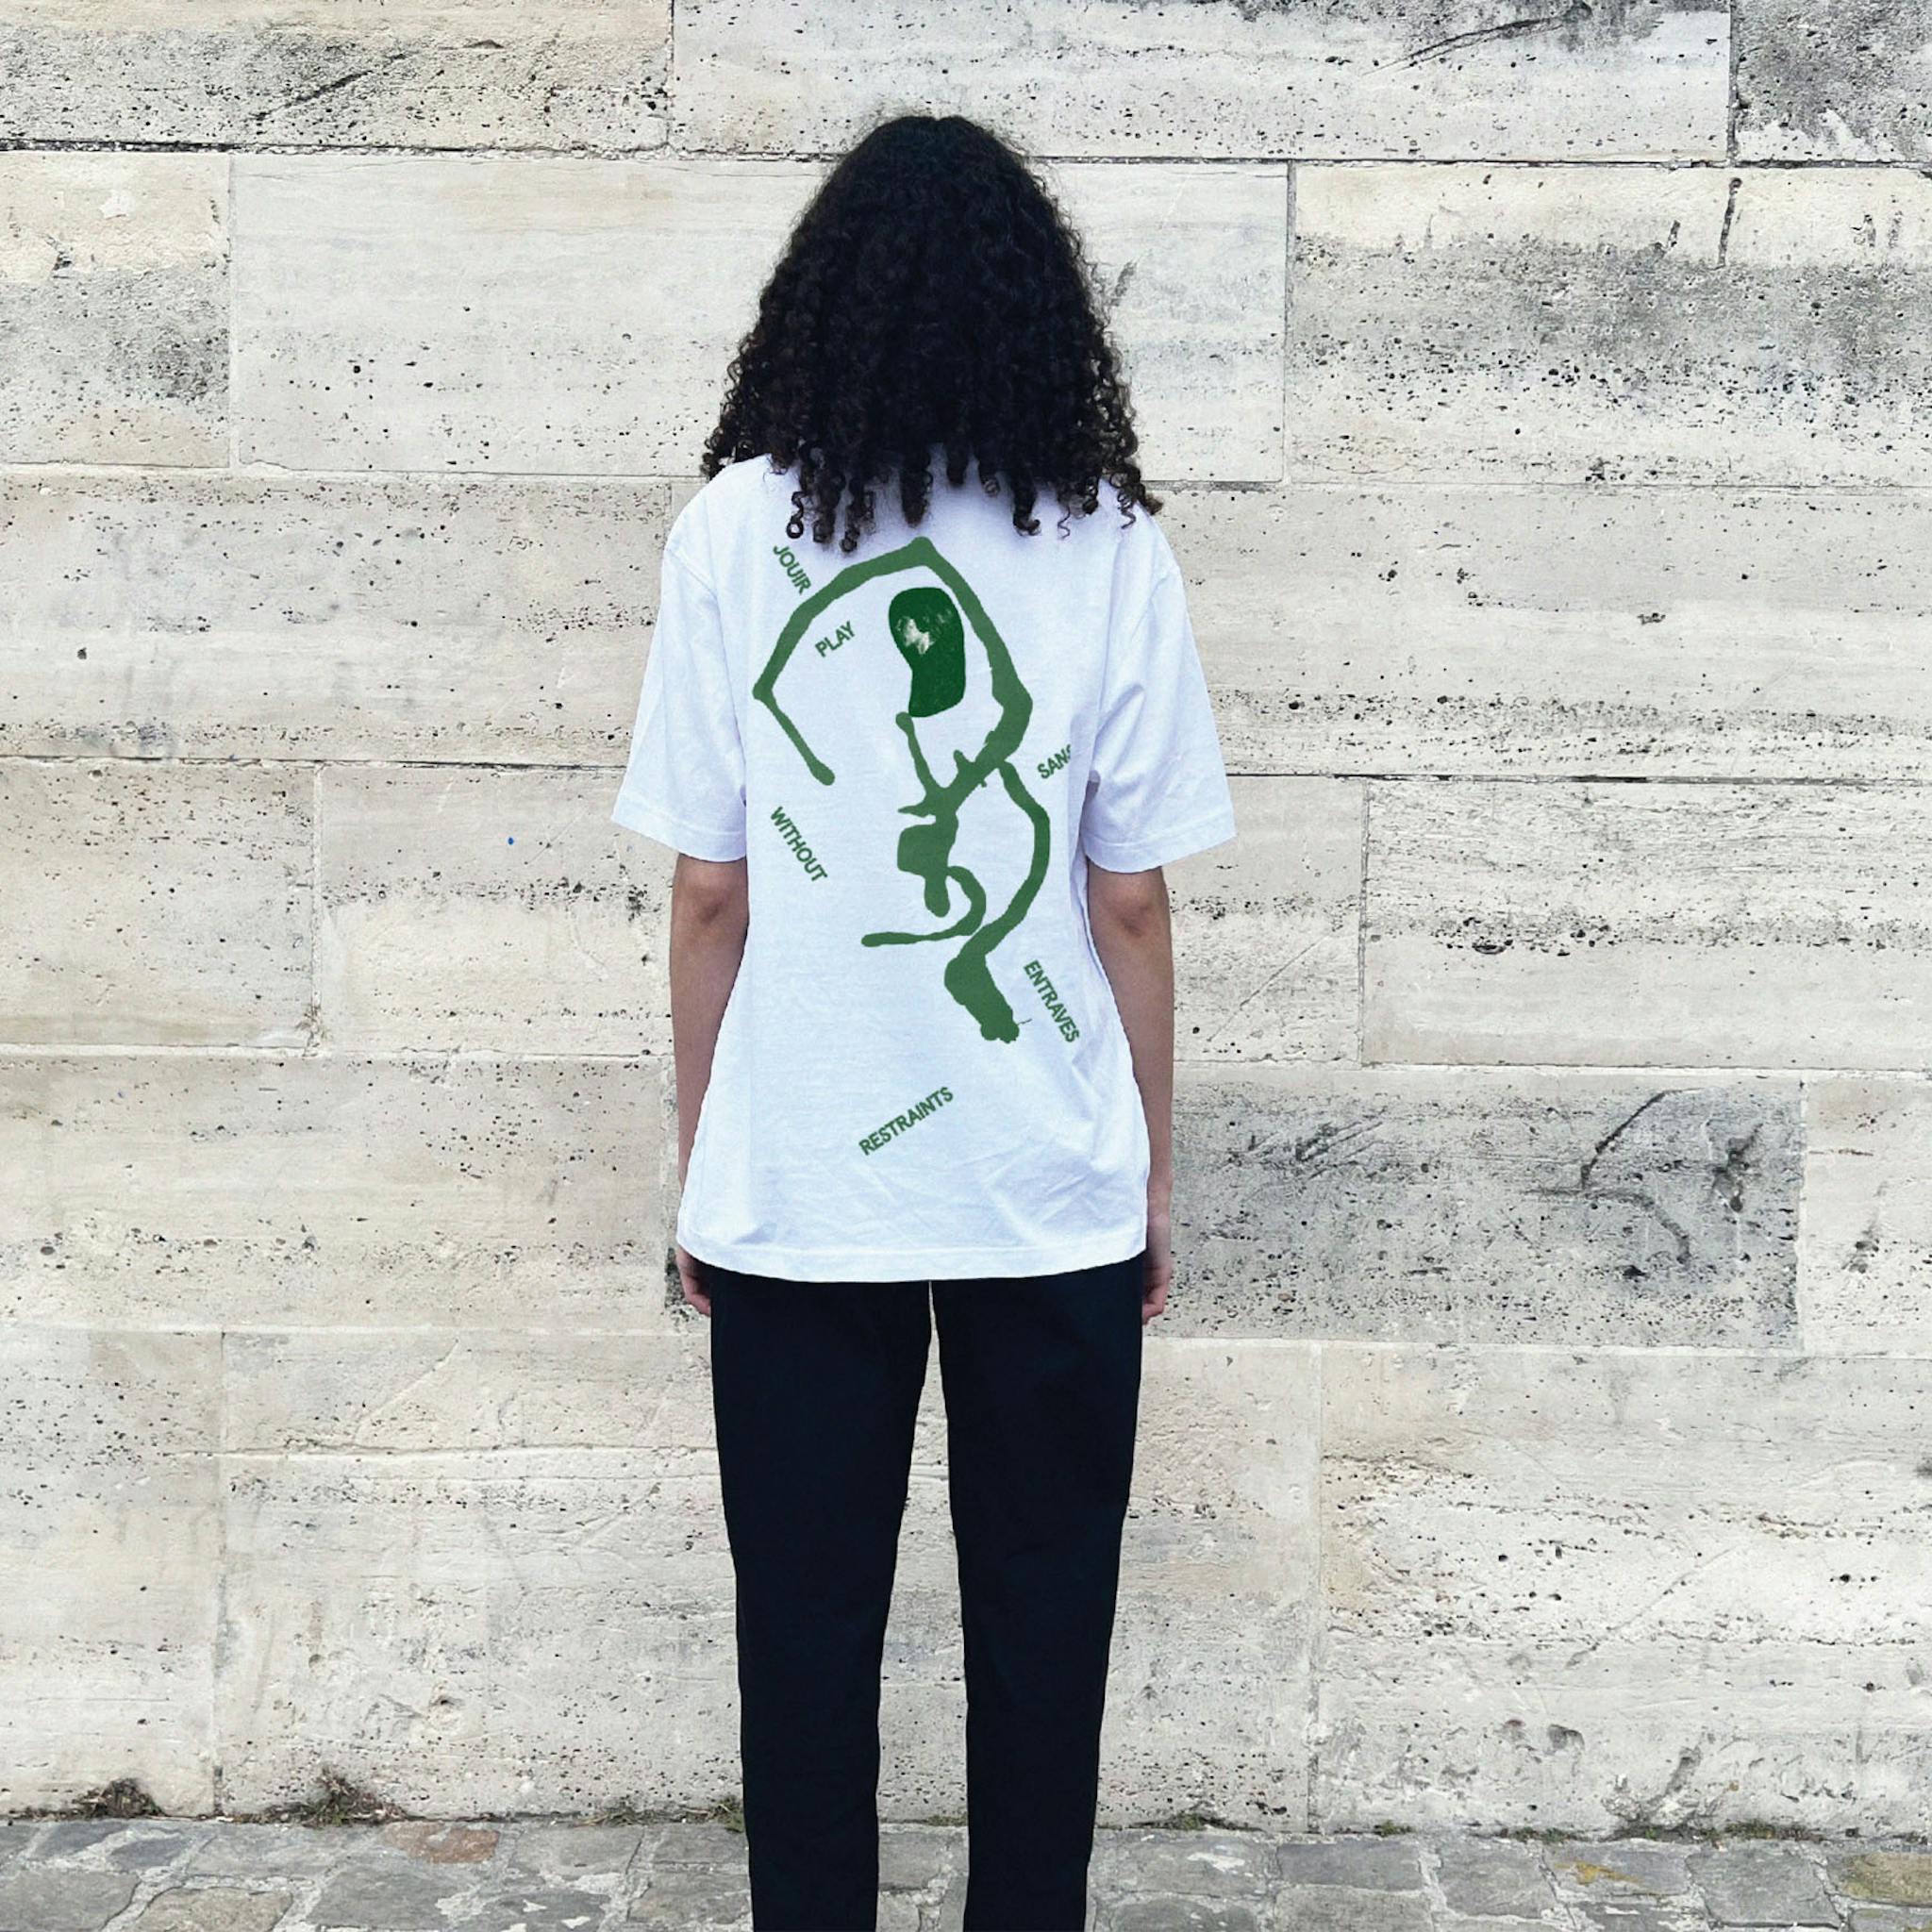 A woman with long dark hair wearing a white t-shirt with a green abstract graphic and the words placed around on the back. 